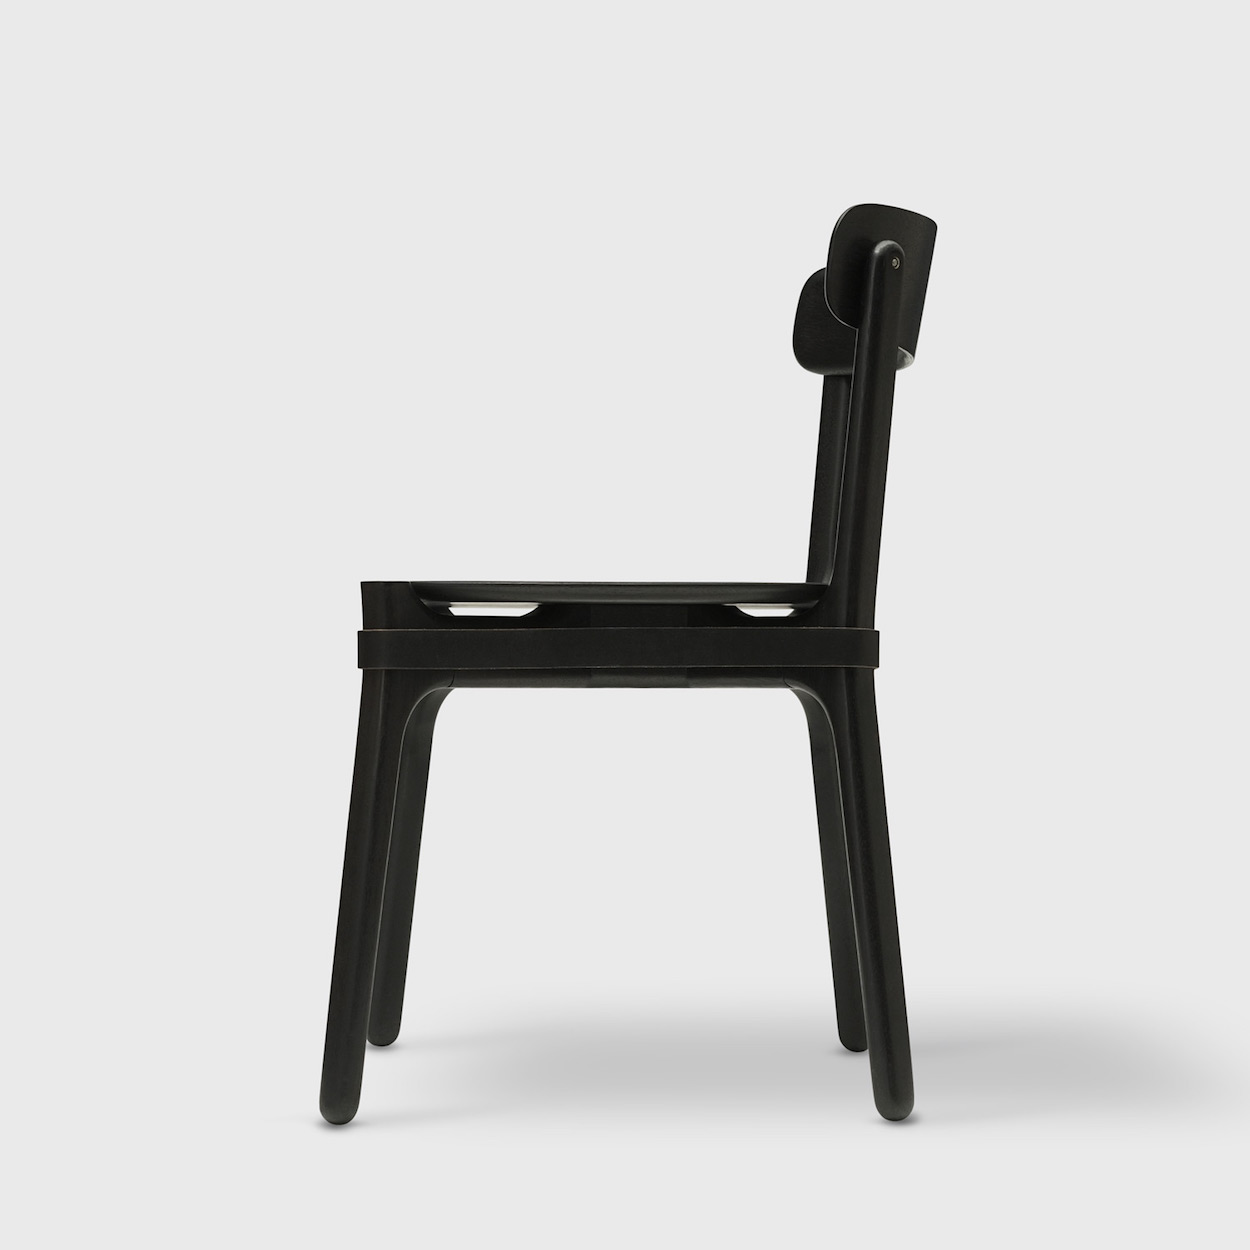 Cinch Minimalist Chair by Box Clever and French Furniture